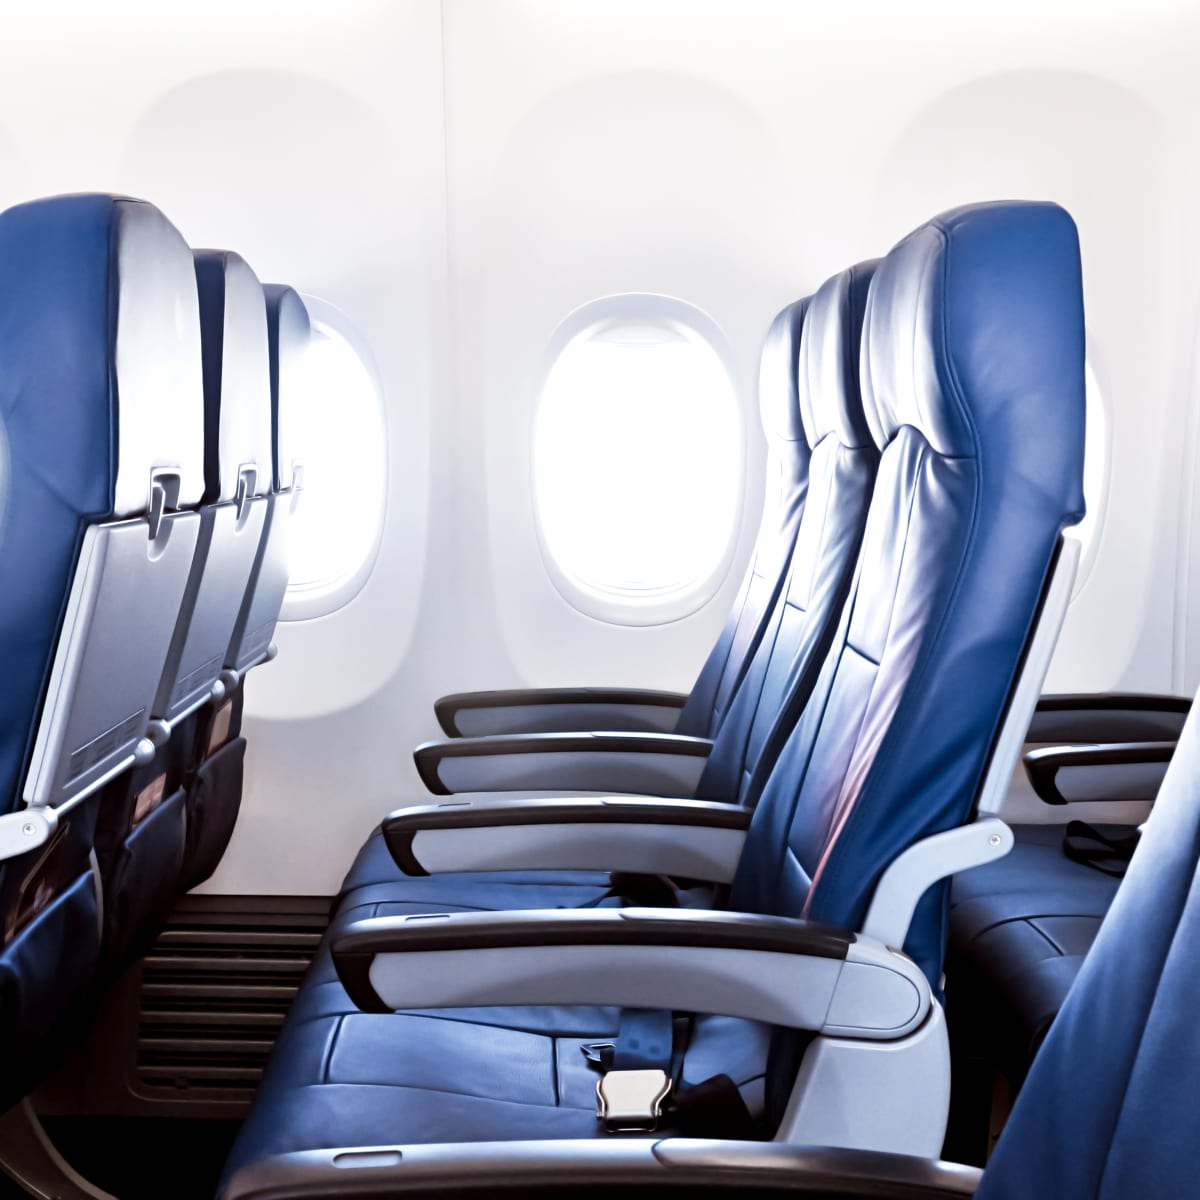 Your airplane seat is going to keep shrinking